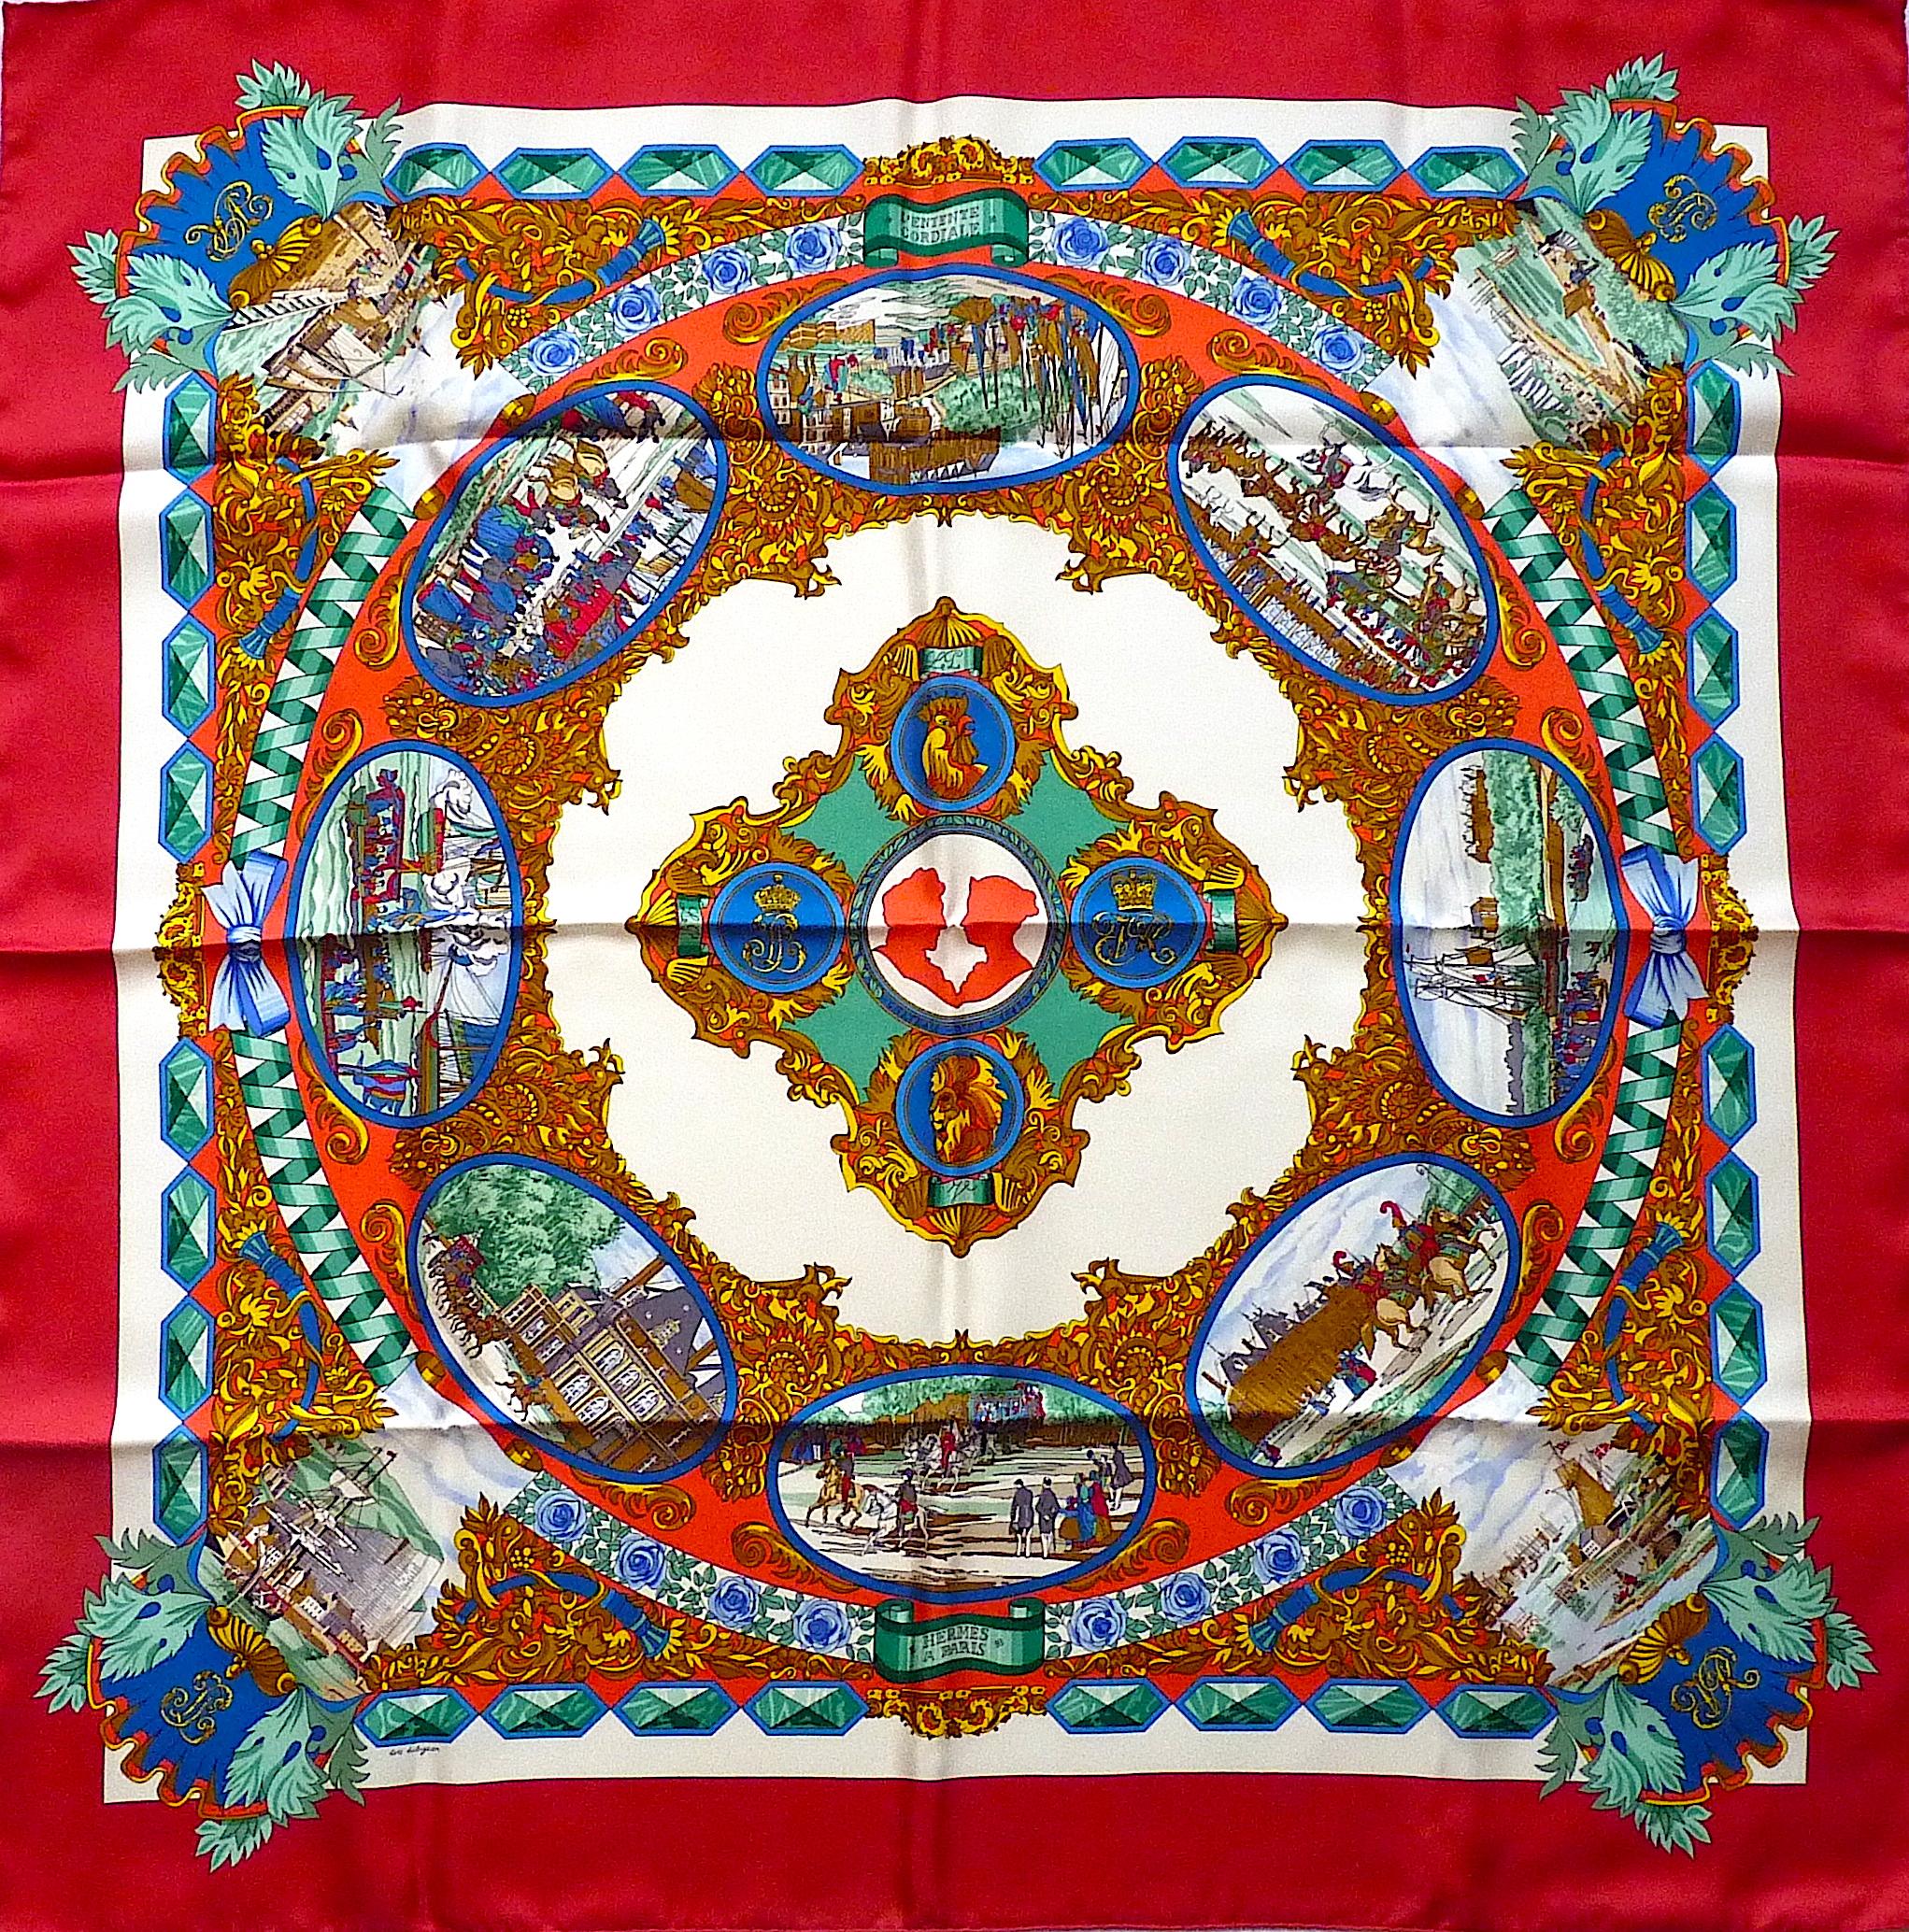 This ultra rare Hermes scarf has been printed in 150 copies only, it was a Special Edition published in 1993 to celebrate the 150 years of the Entente Cordiale between France and the United Kingdom.
In 1843, King Louis-Philippe and Queen Victoria